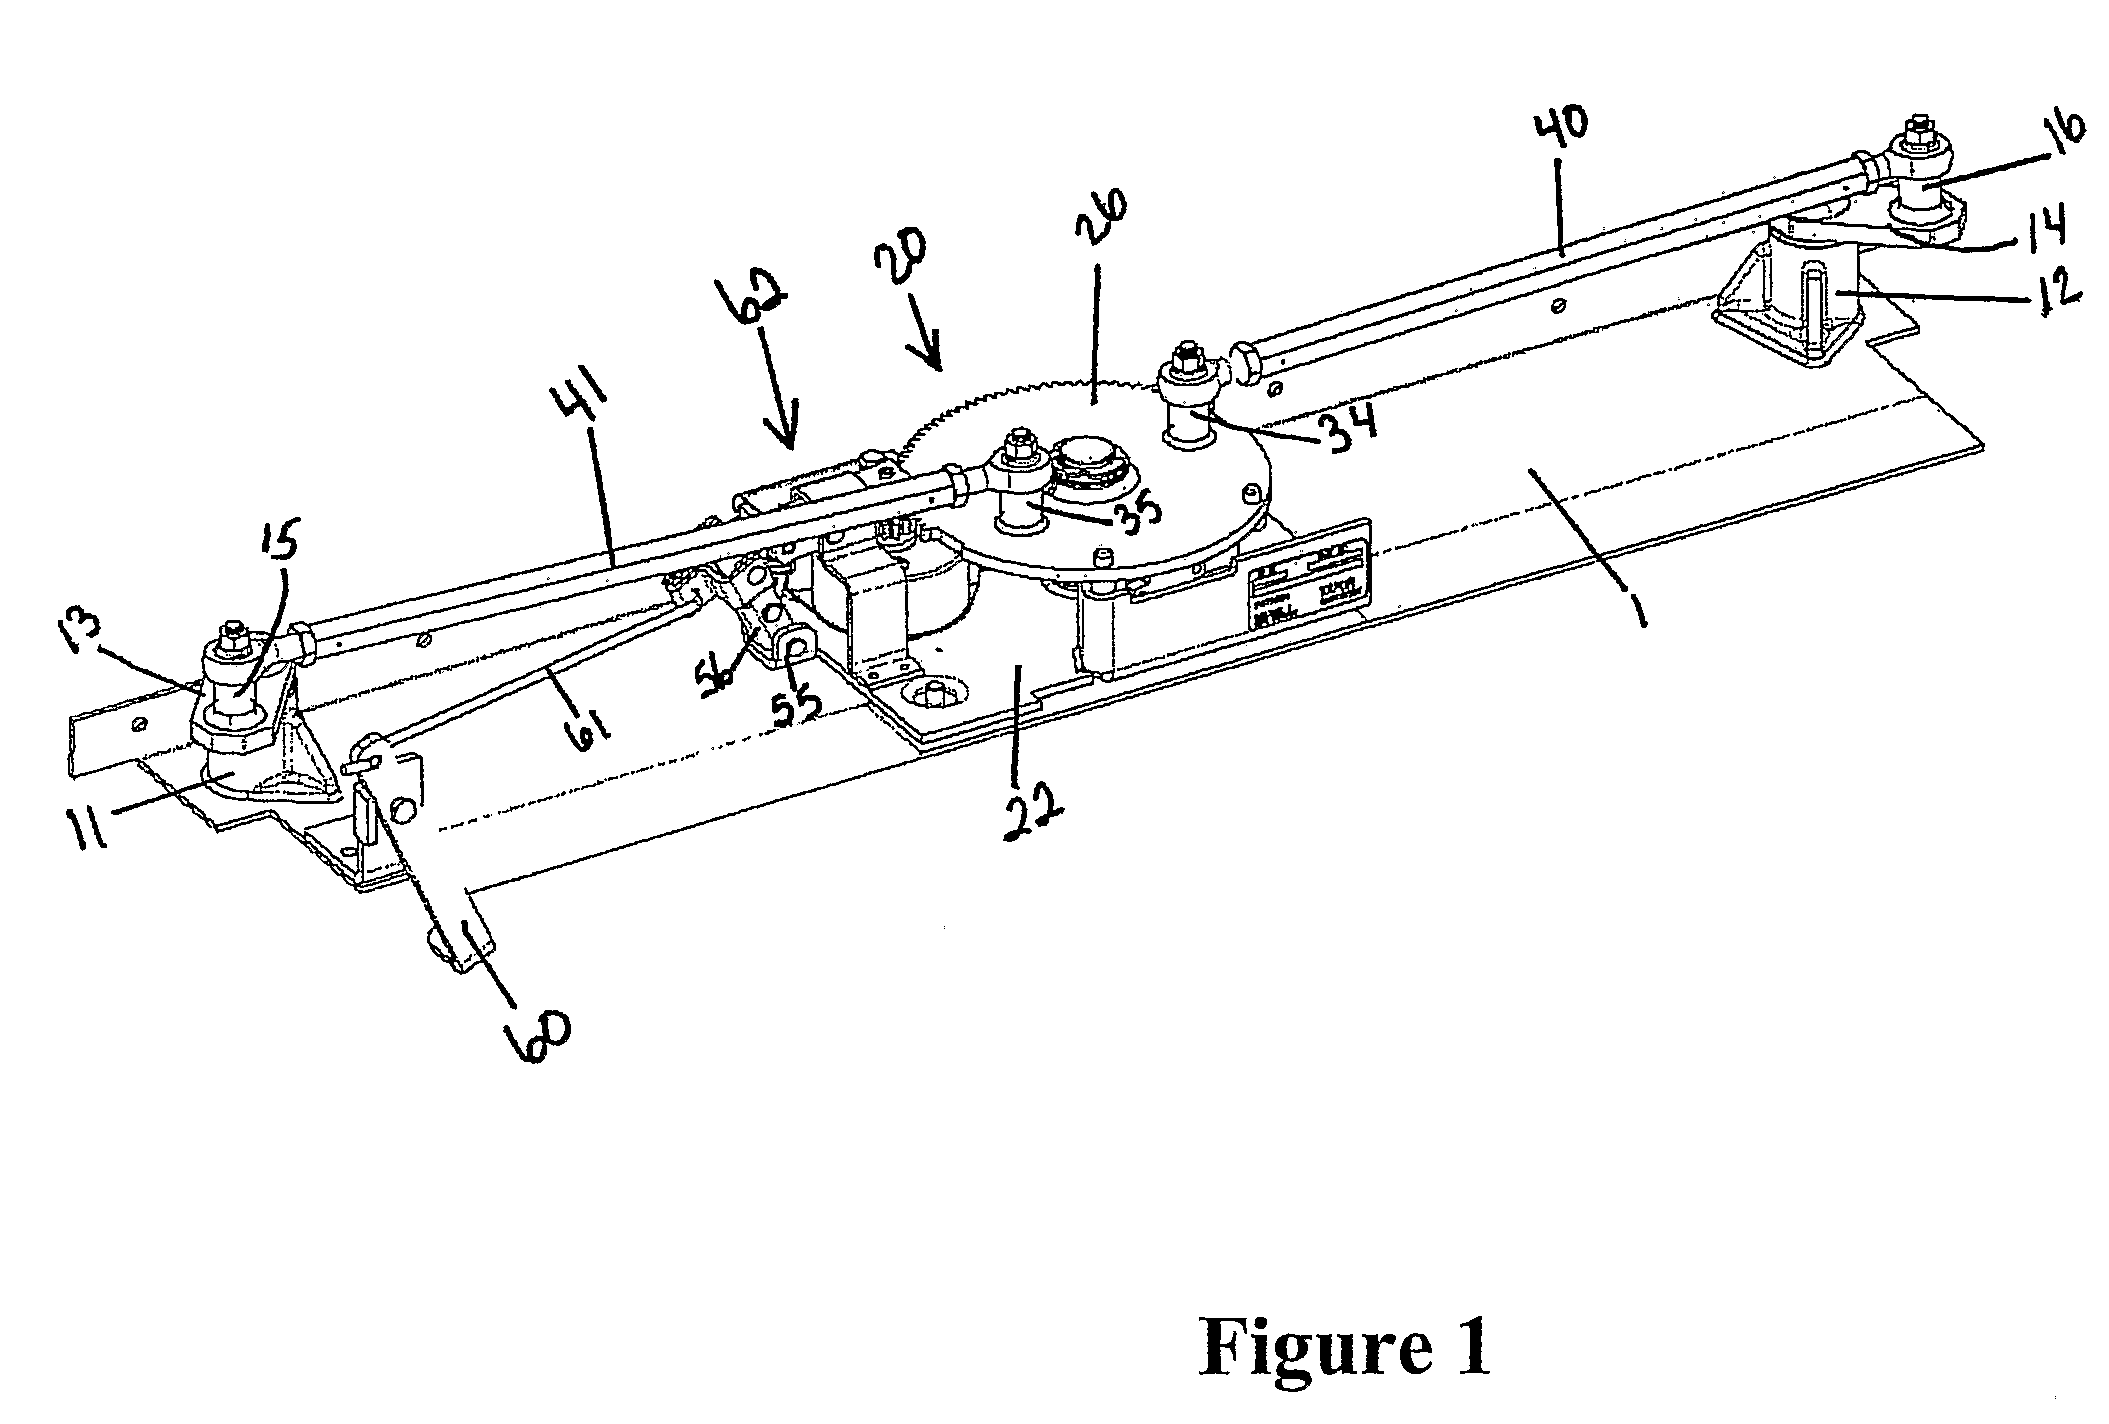 Electrically Driven Entryway Actuation System